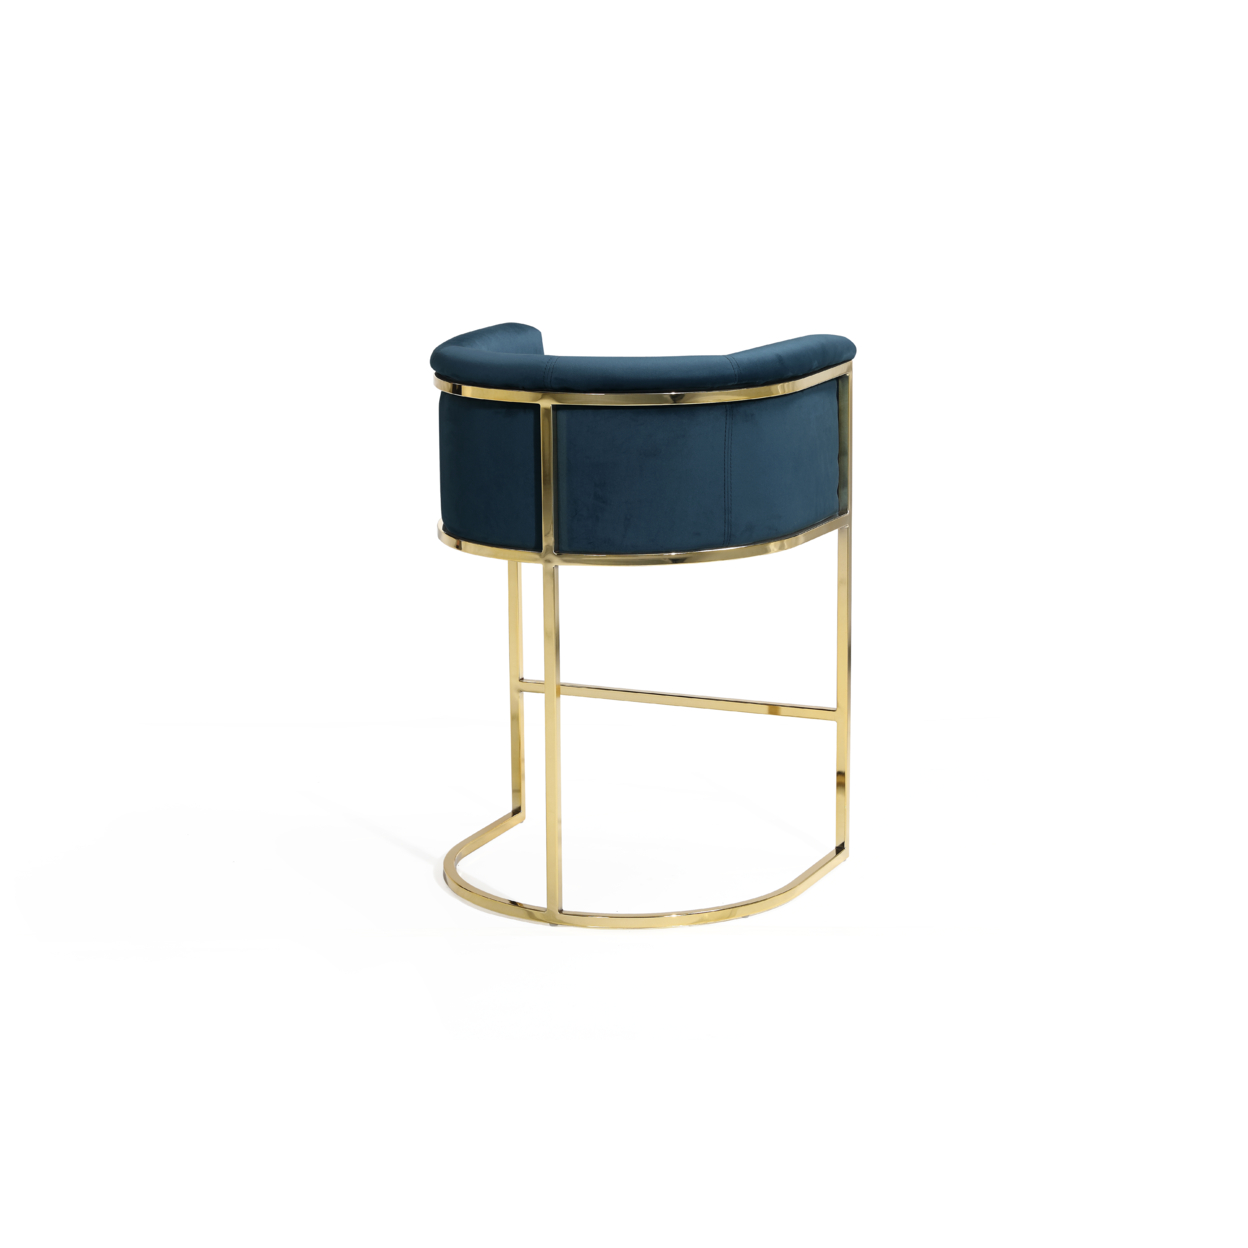 Iconic Home Scout Counter Stool Chair Velvet Upholstered Rolled Shelter Arm Design Half-Moon Goldtone Solid Metal U-Shaped Base - Teal